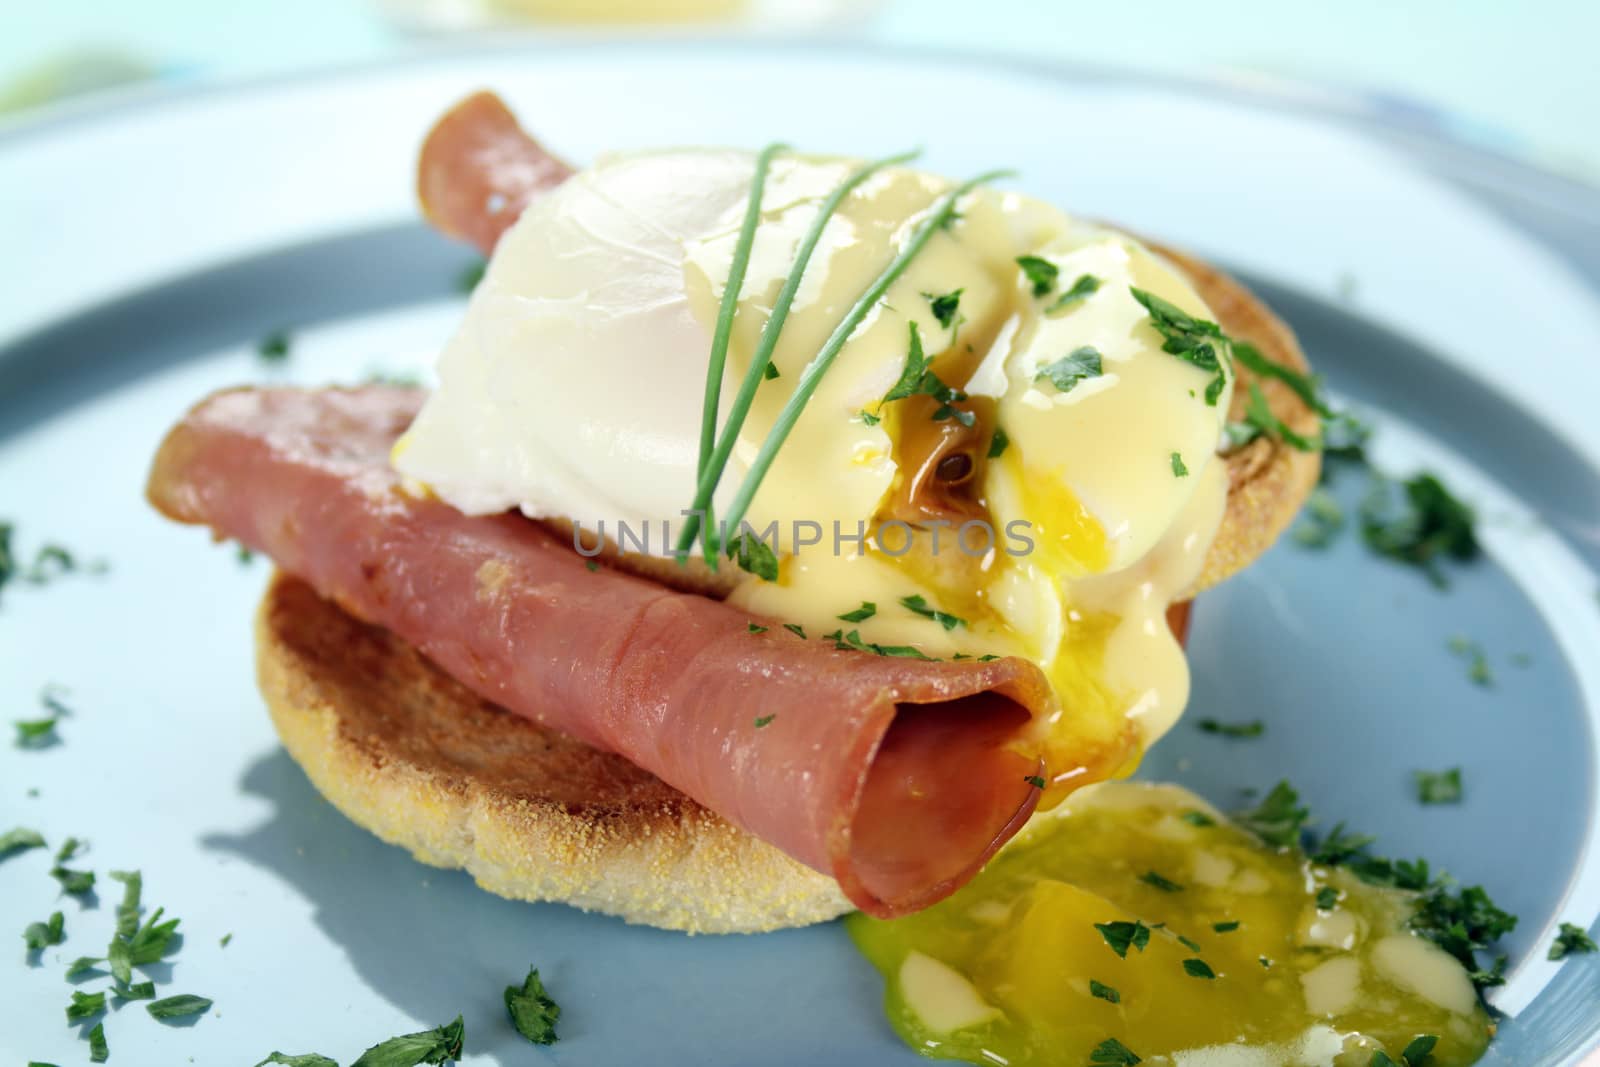 Delicious breakfast of eggs benedict with beautiful rich hollandaise sauce.